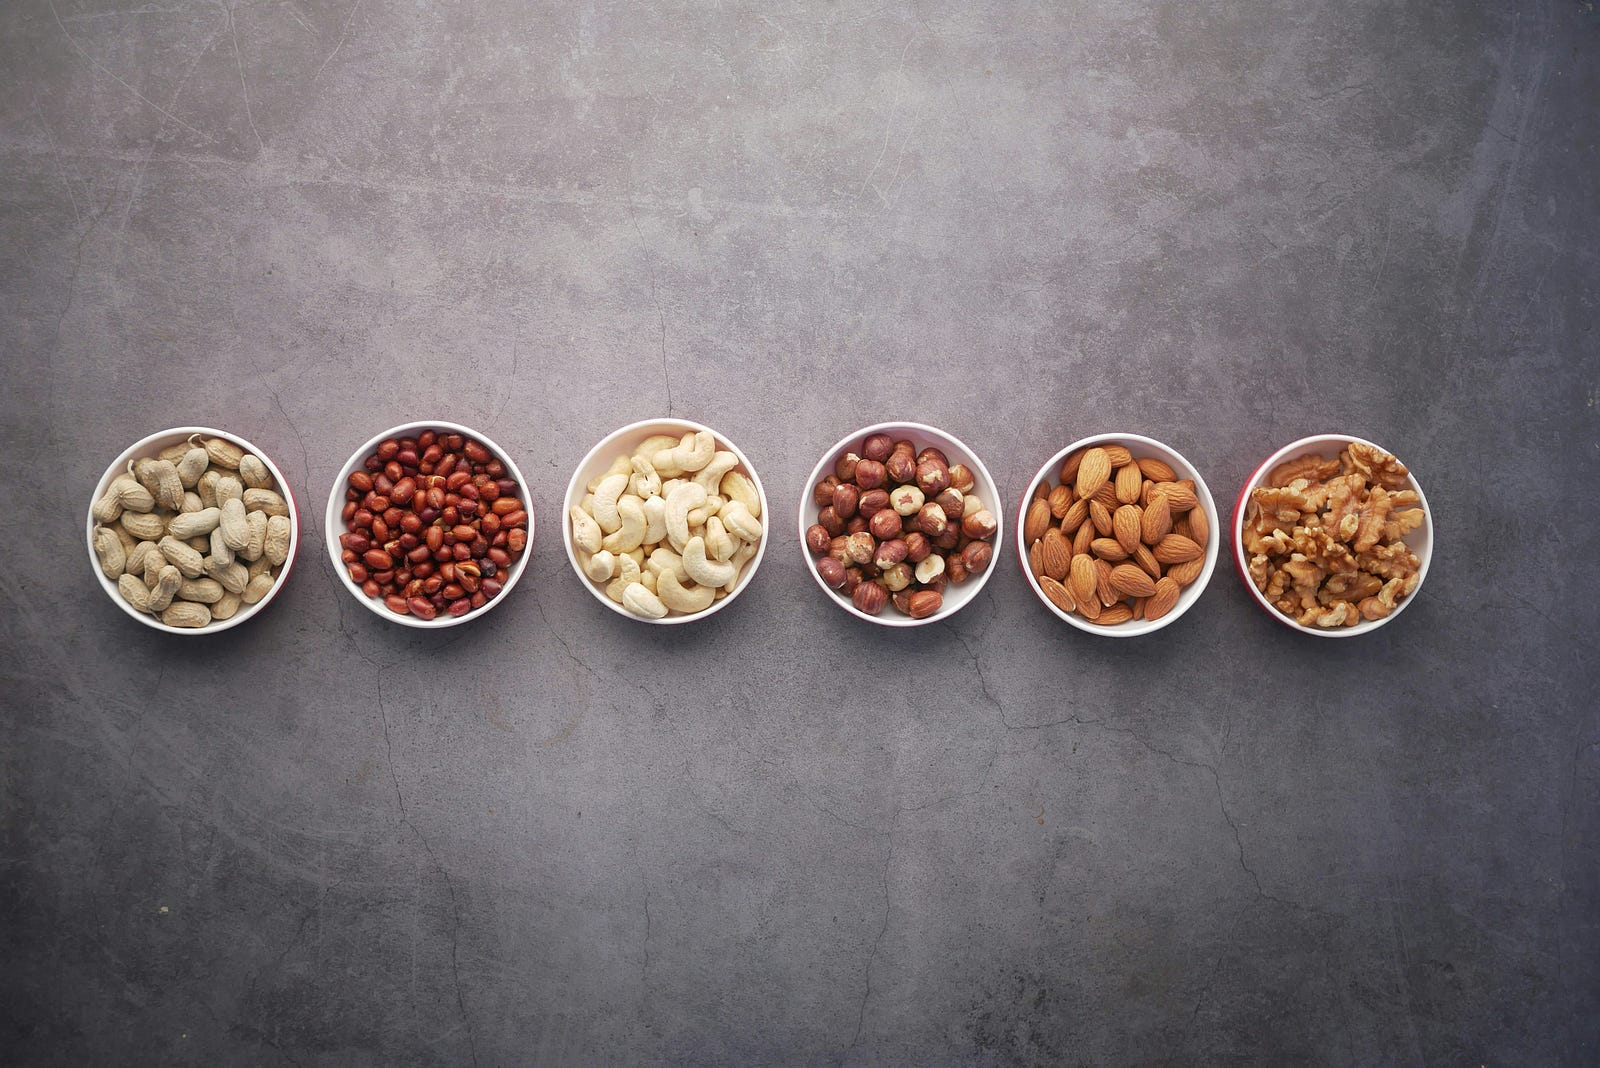 Six small white bowls of different types of nuts are arrayed left to right.